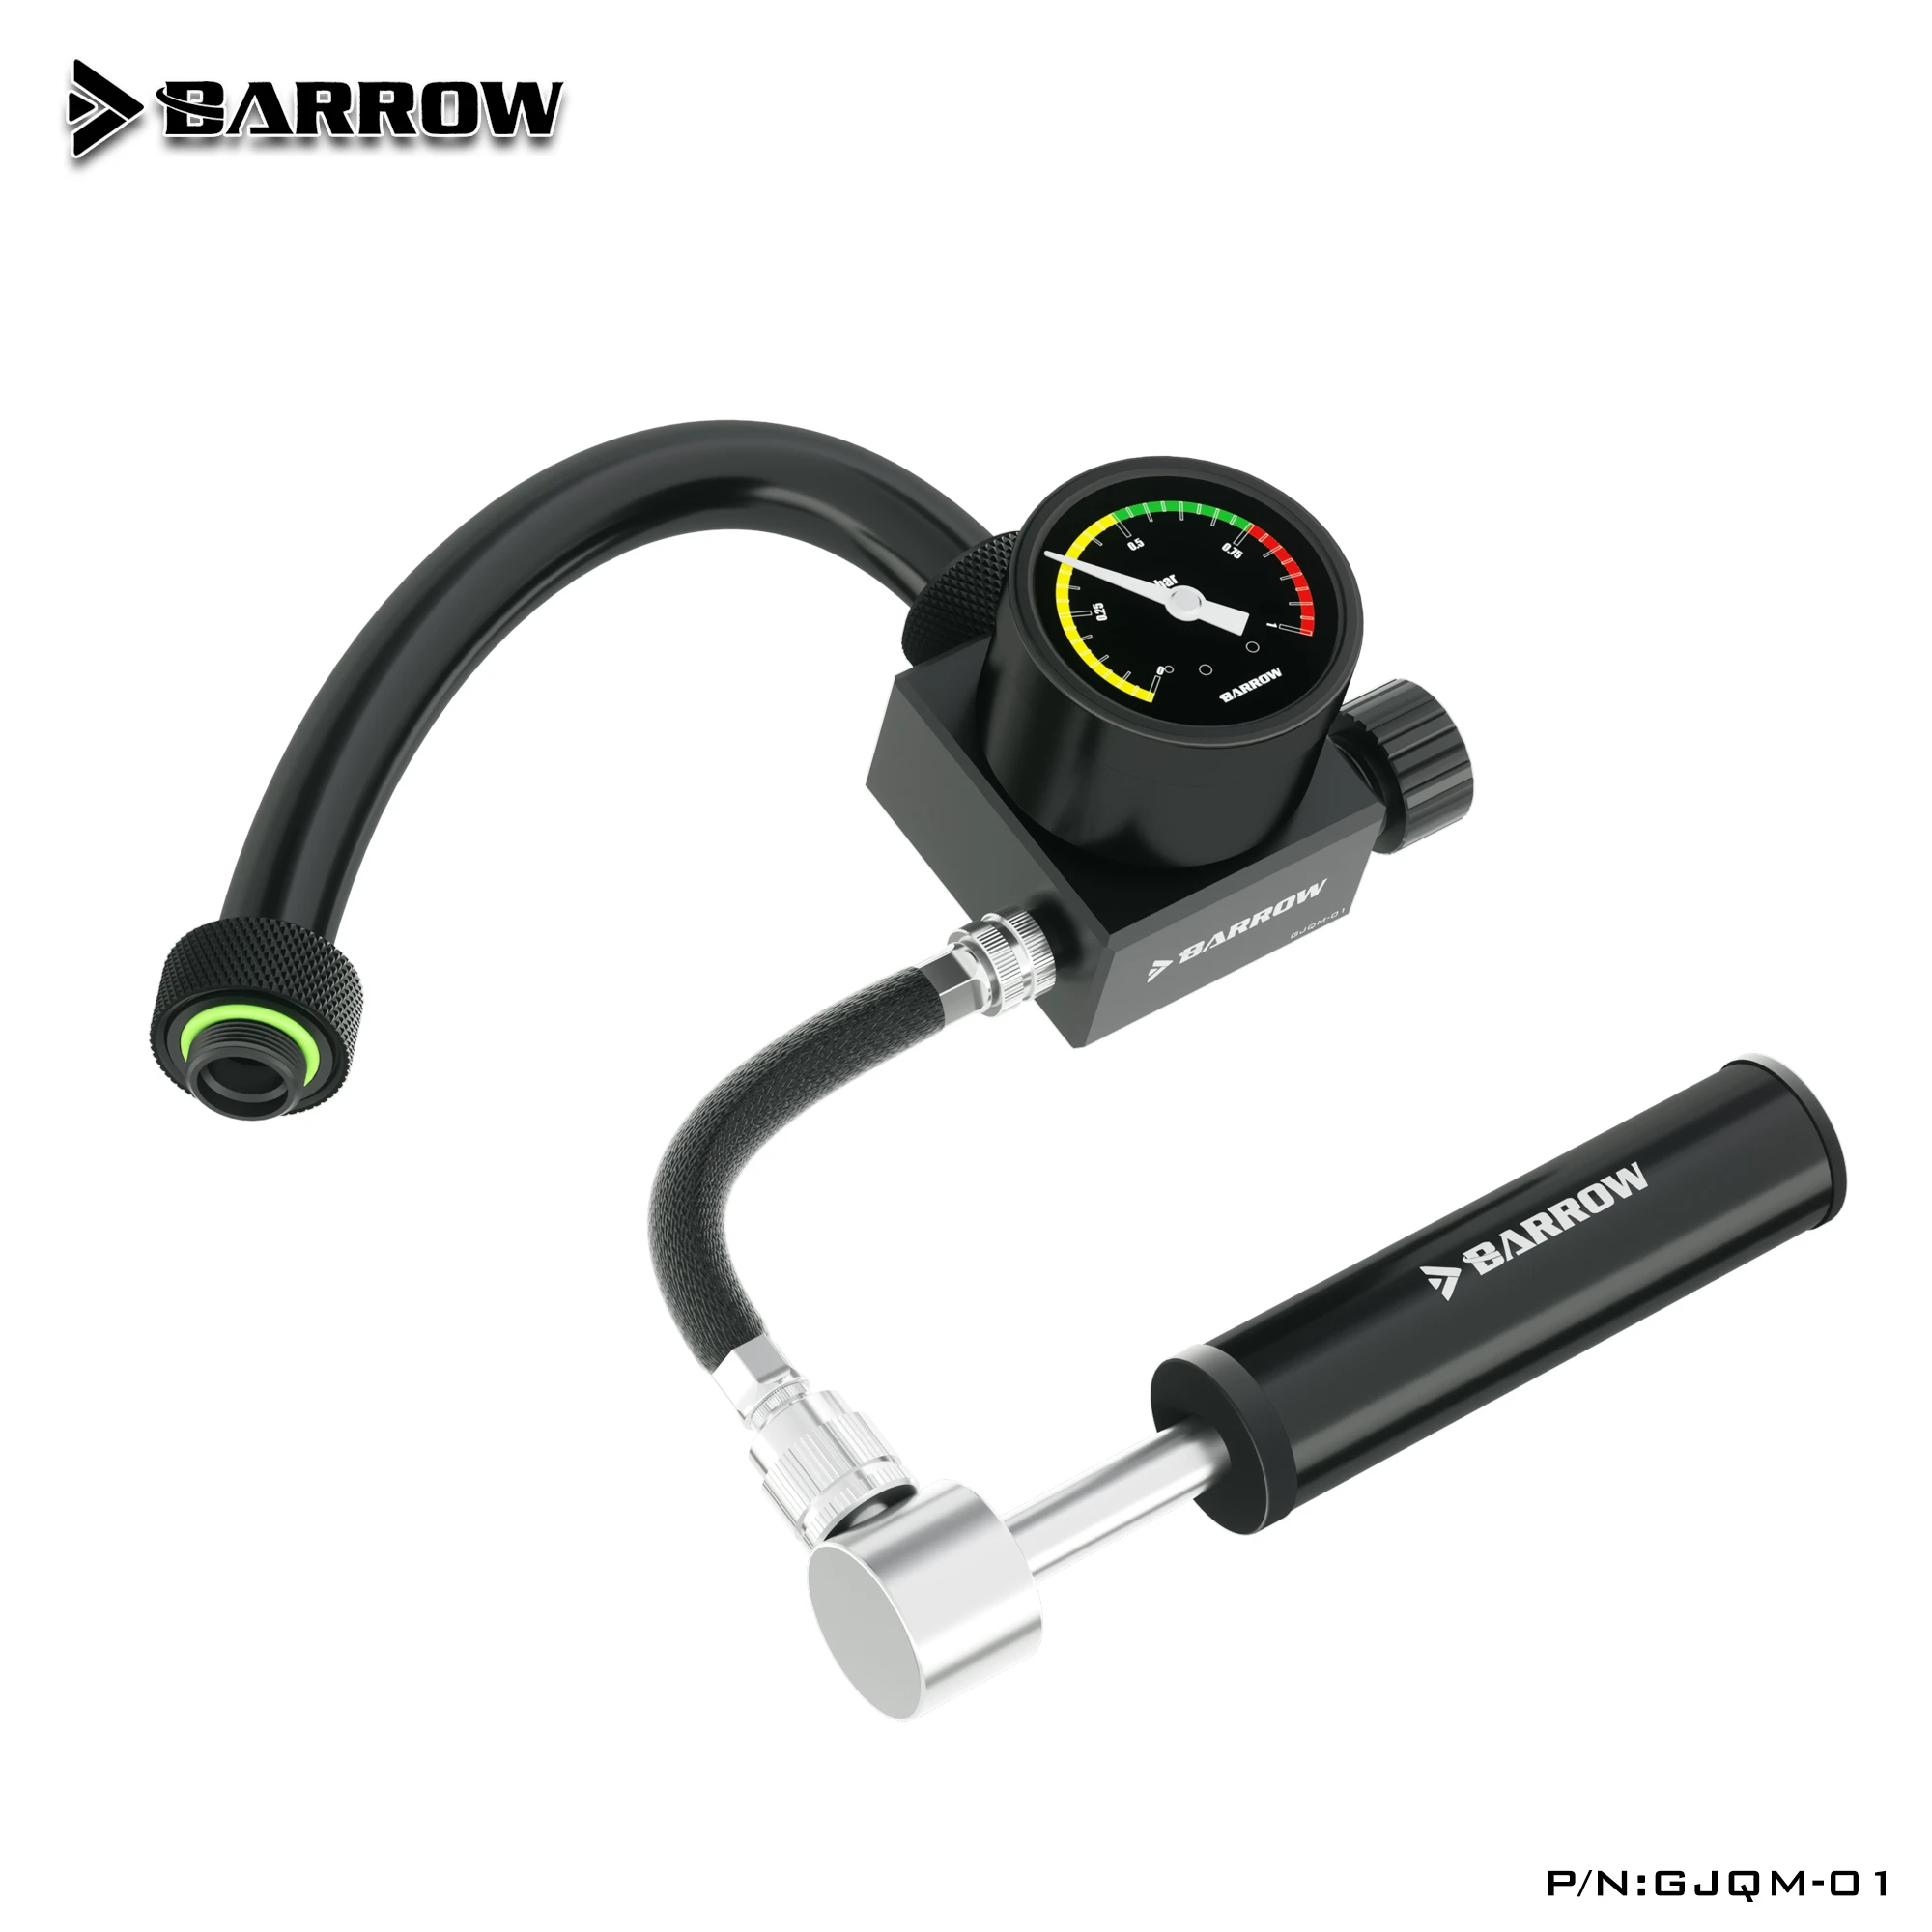 Barrow Water-proof Leak-proof Seal Tester Air Pressure Test Tools   Water Cooling Test System GJQM-01